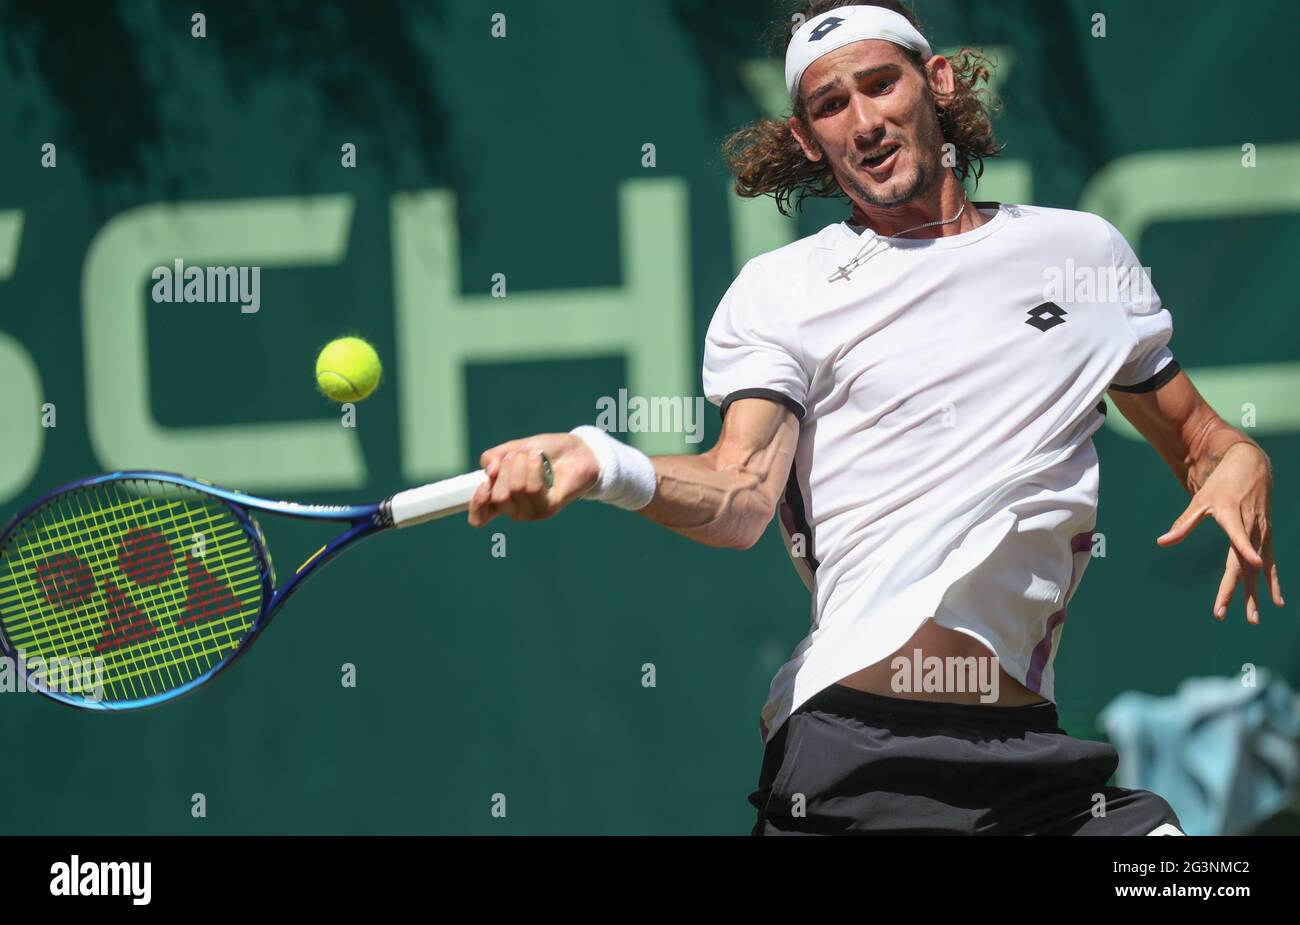 Halle, Germany. 17th June, 2021. Tennis, ATP Tour, Singles, Men, Round of  16, Harris (South Africa) - Lacko (Slovakia): Lloyd Harris plays a  forehand. Credit: Friso Gentsch/dpa/Alamy Live News Stock Photo - Alamy